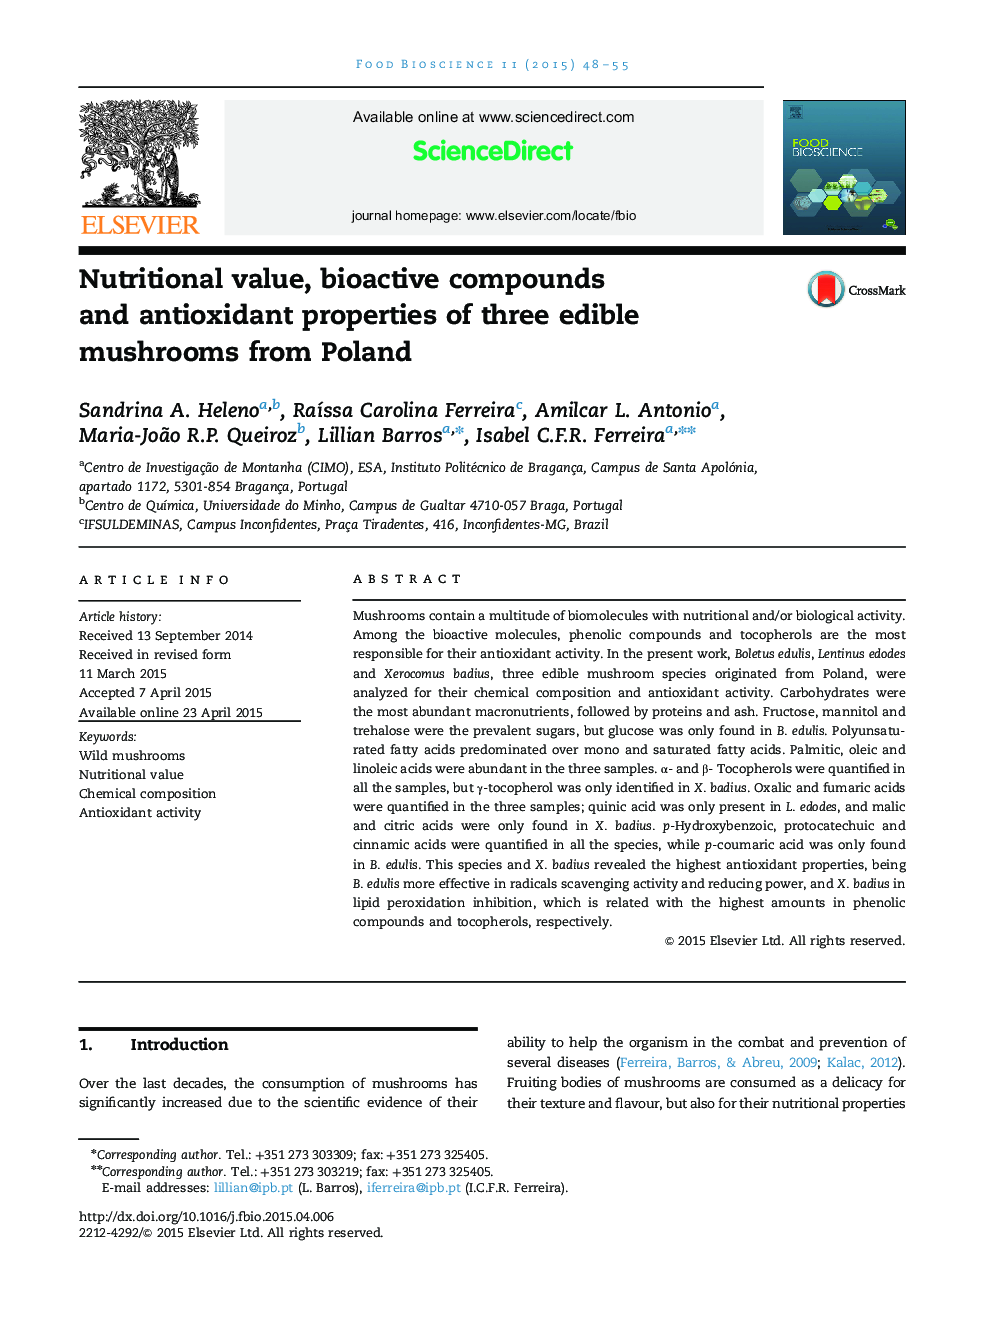 Nutritional value, bioactive compounds and antioxidant properties of three edible mushrooms from Poland